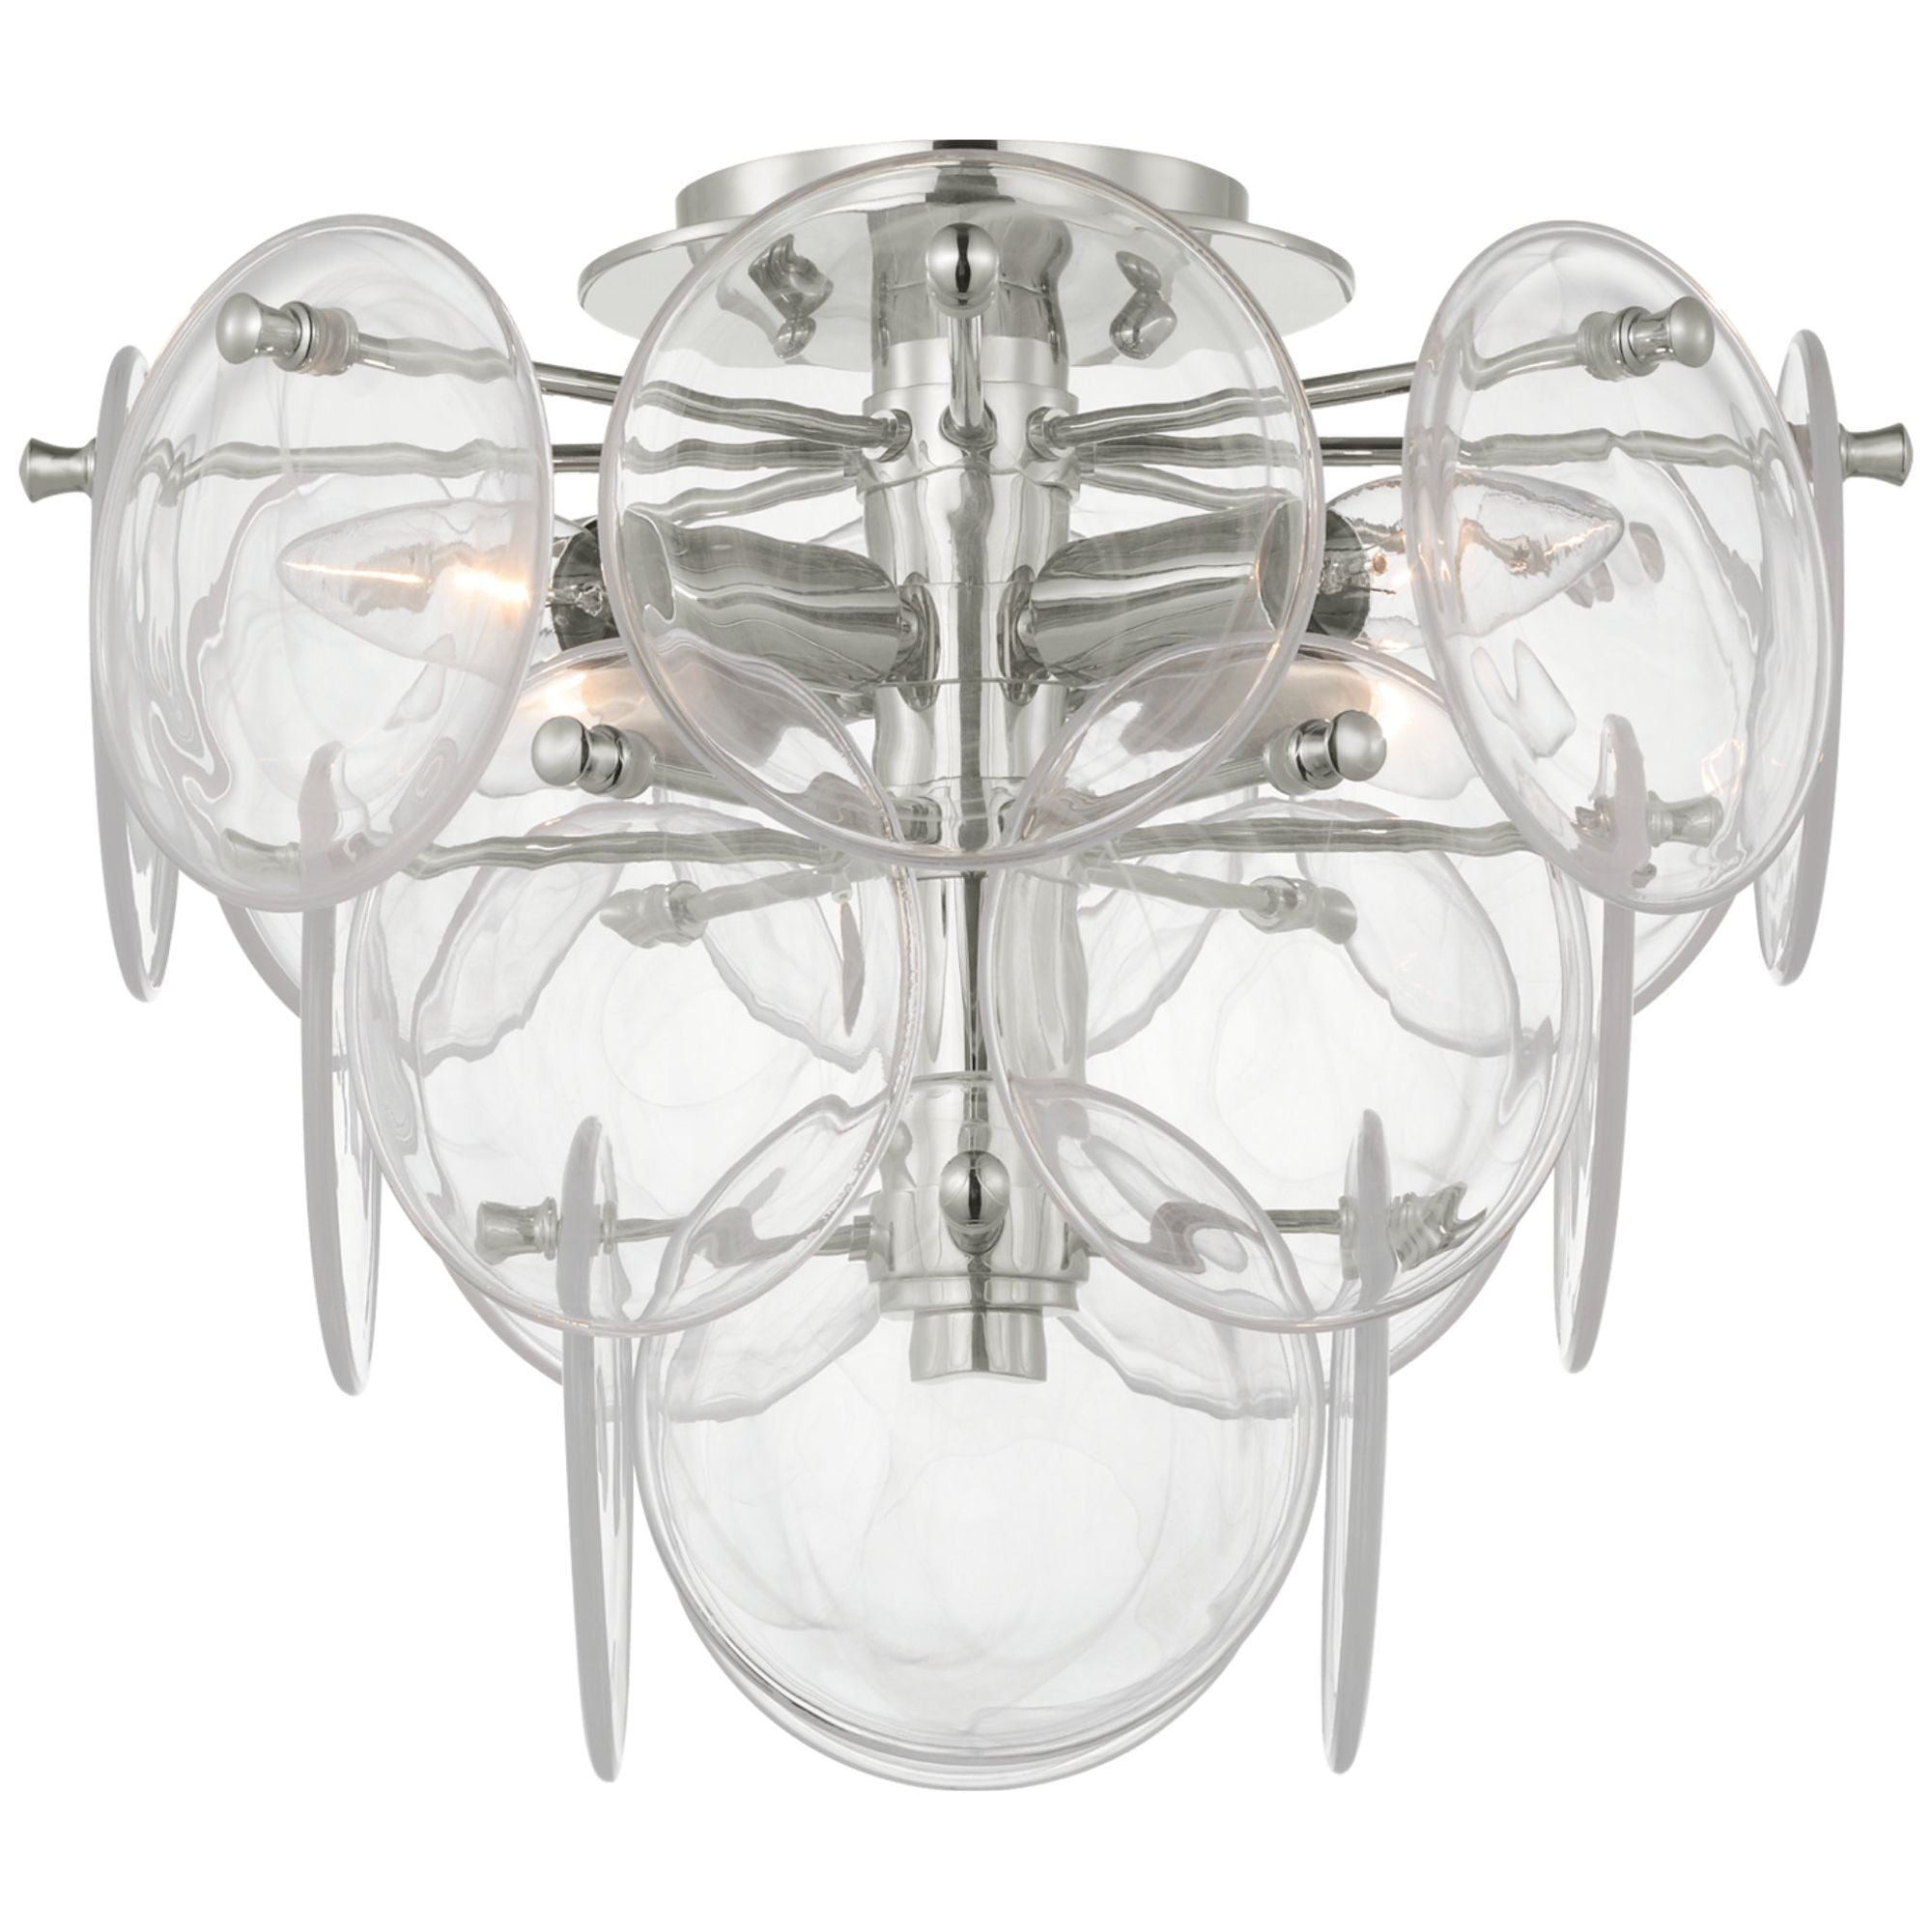 AERIN Loire Medium Tiered Flush Mount in Polished Nickel with Clear Strie Glass